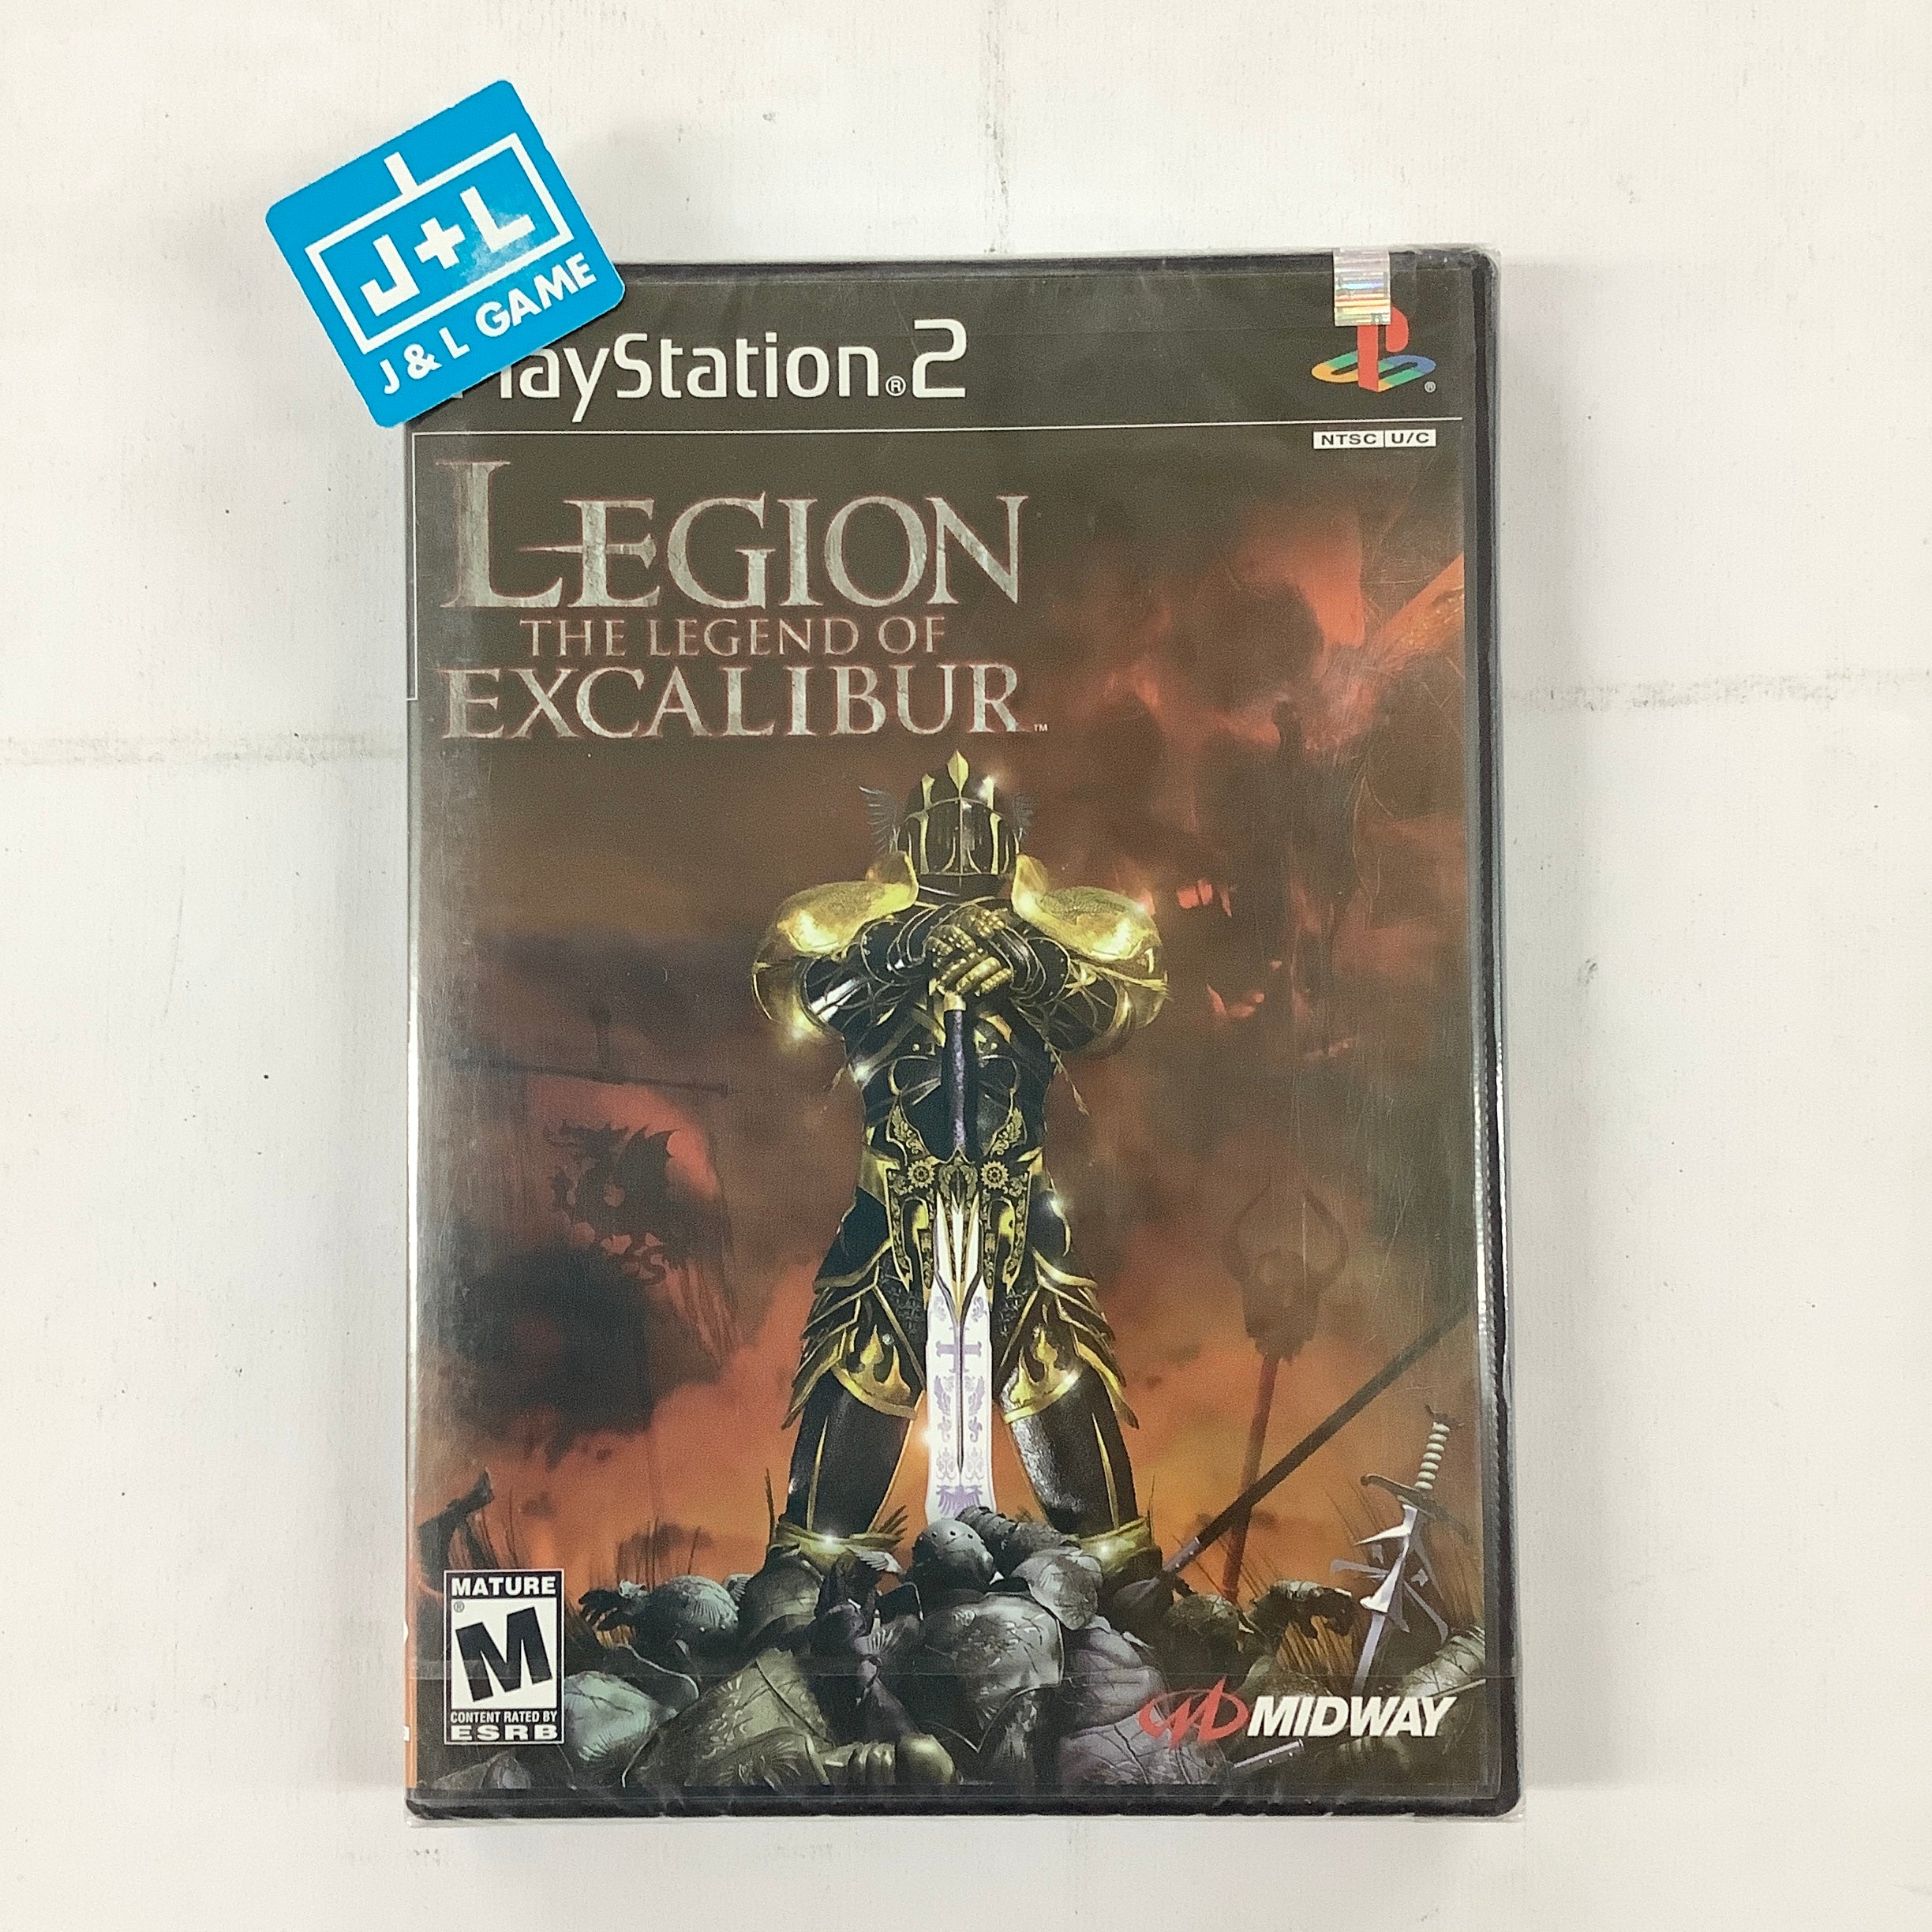 Legion: The Legend of Excalibur - (PS2) PlayStation 2 Video Games Midway   